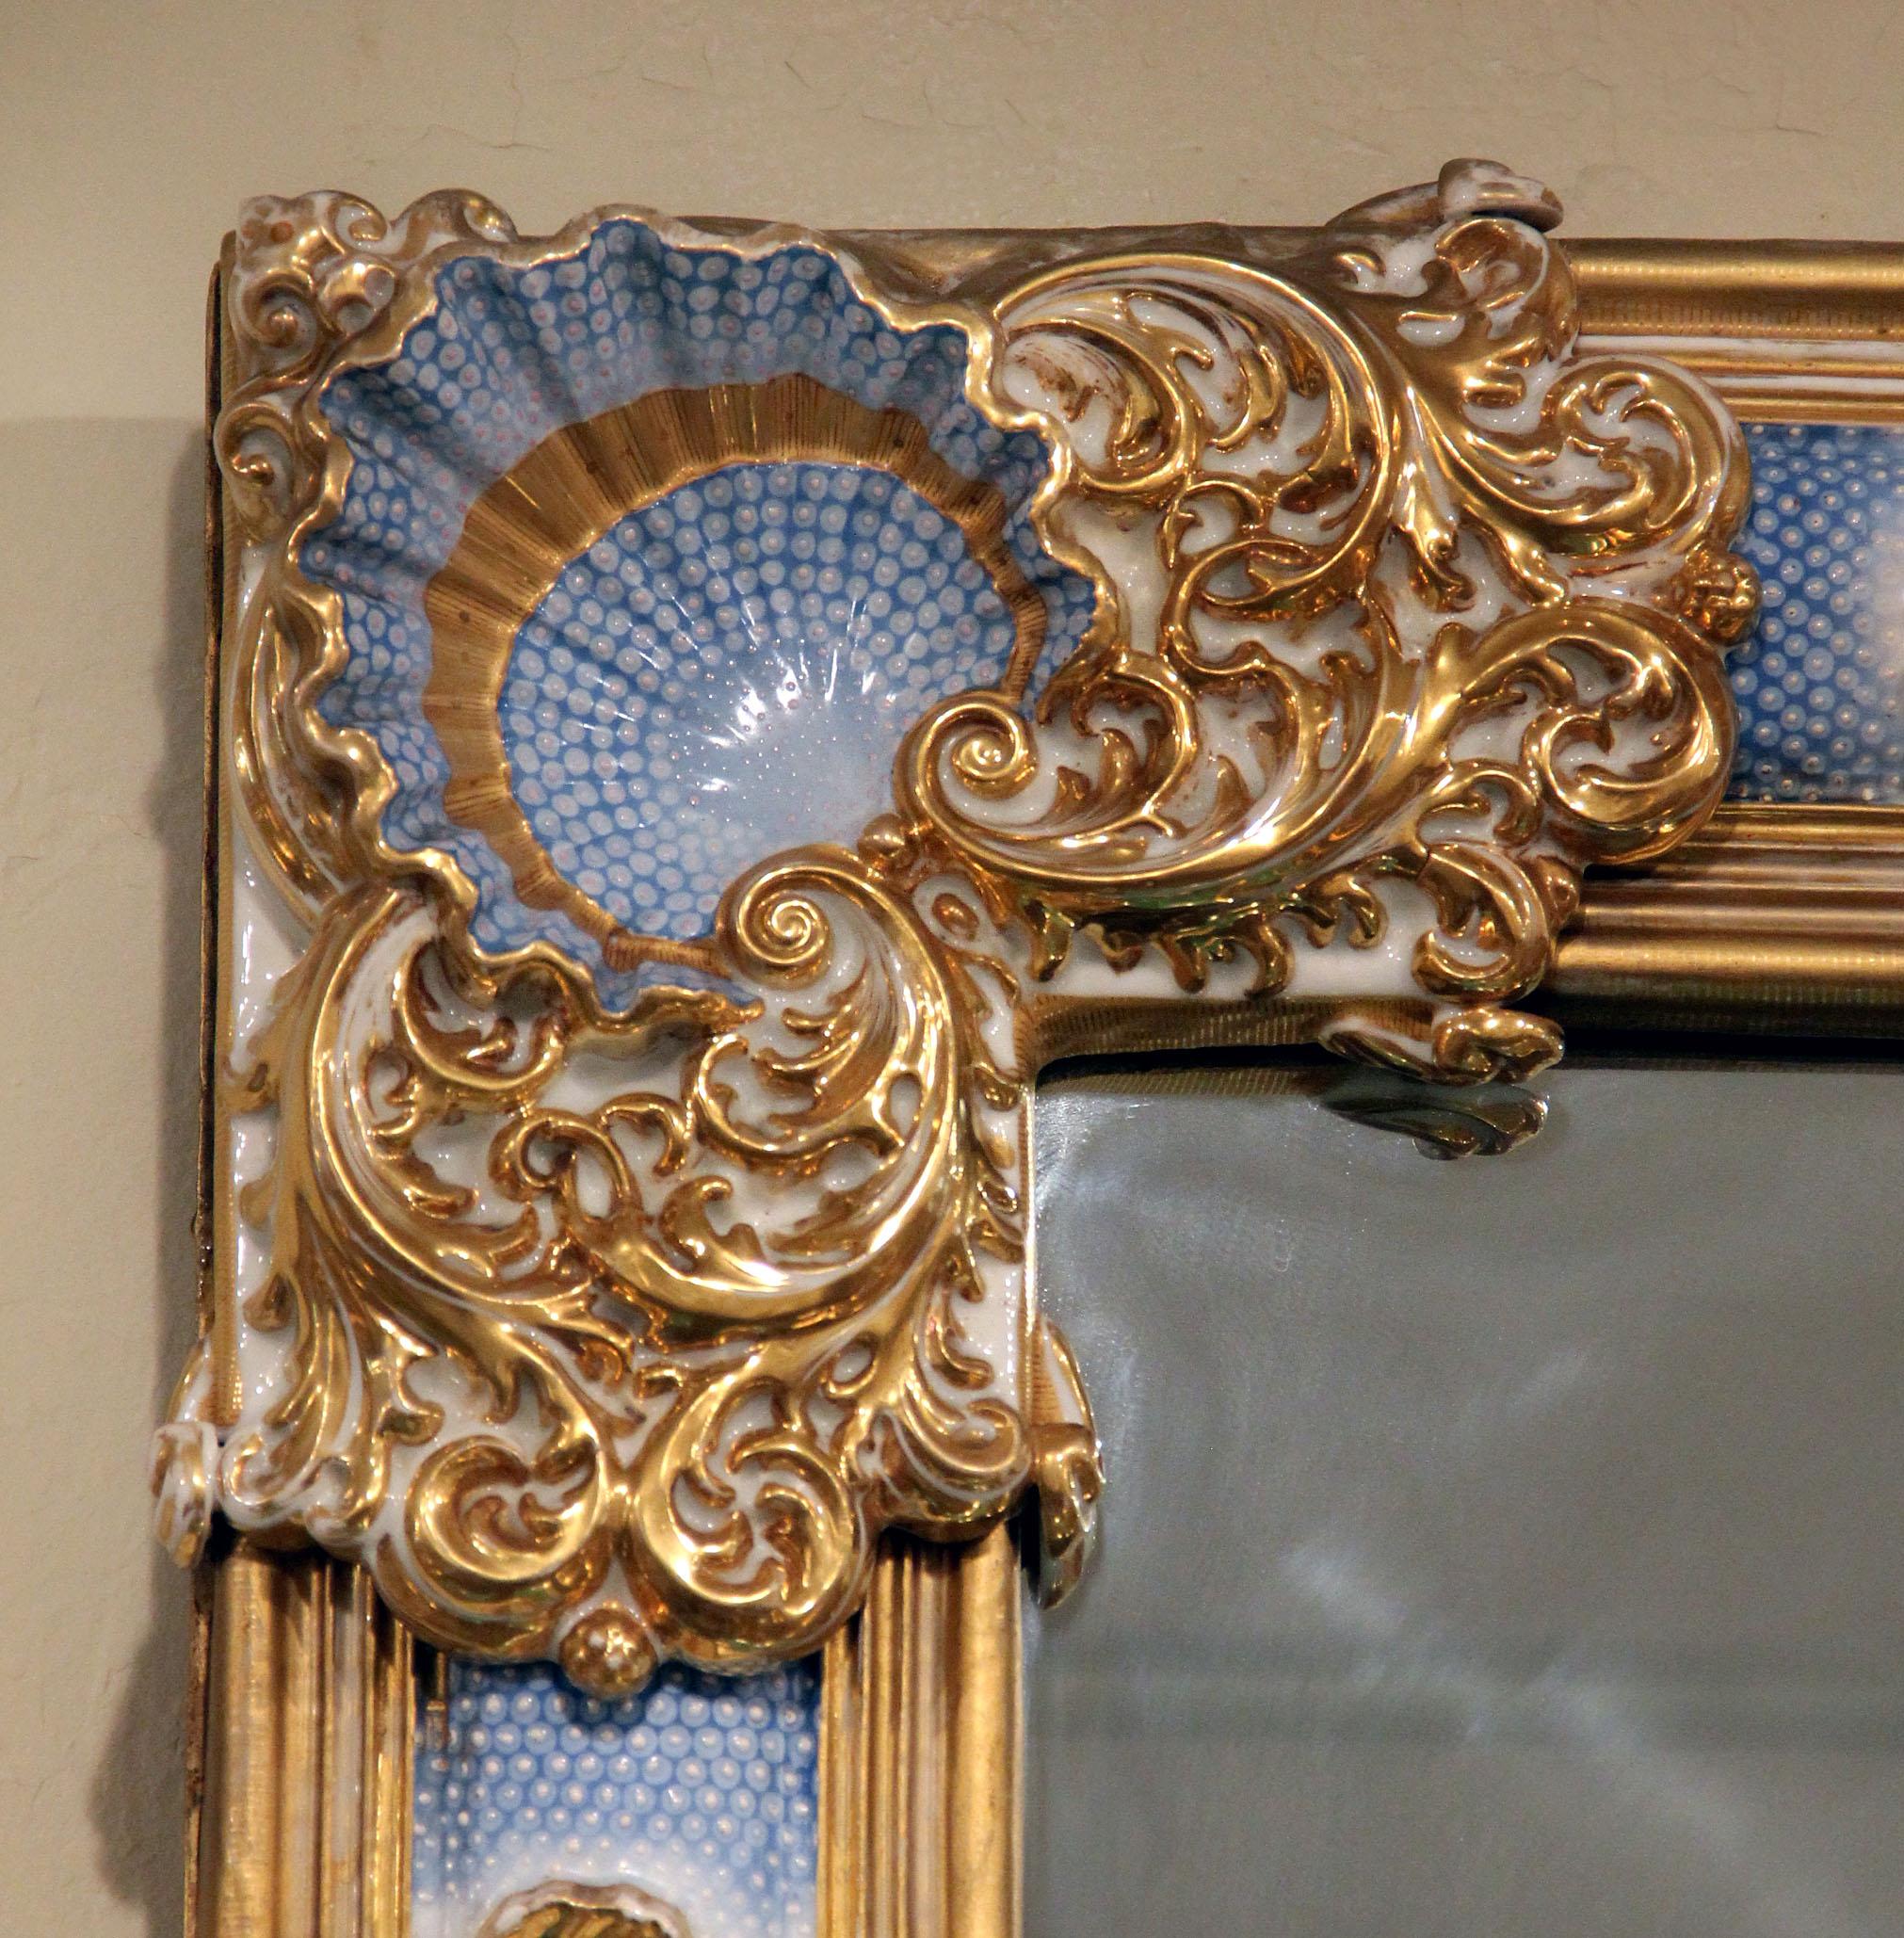 Glass Rare and Special Palatial Pair of Late 19th Century Sèvres Porcelain Mirrors